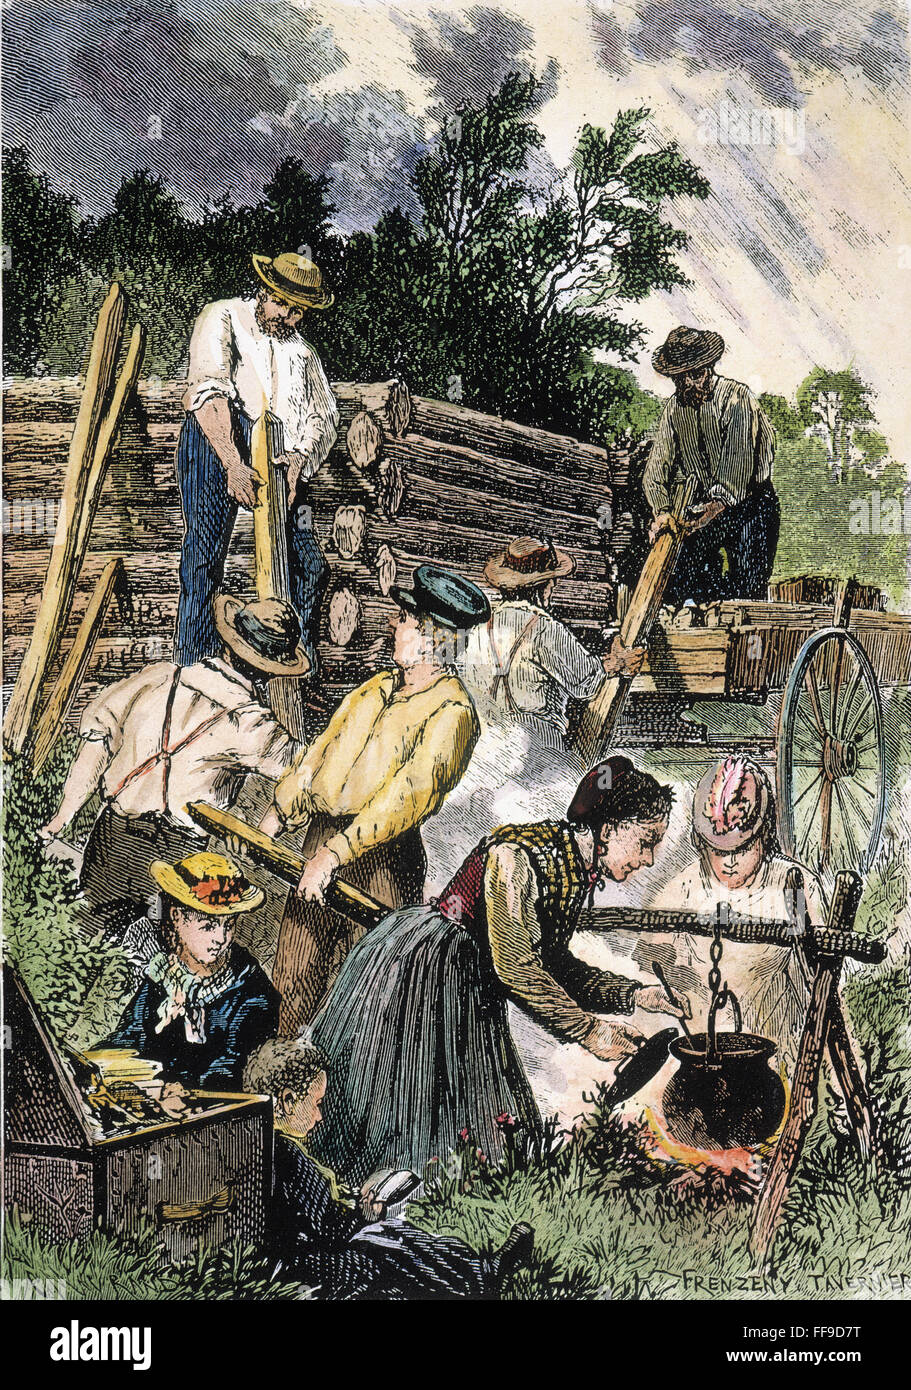 EMIGRANTS: BUILDING CABIN. /nEmigrants building a log cabin in the American West. Wood engraving, 1874, by Charles Maurand, after a sketch by Paul Frenzeny and Jules Tavernier. Stock Photo